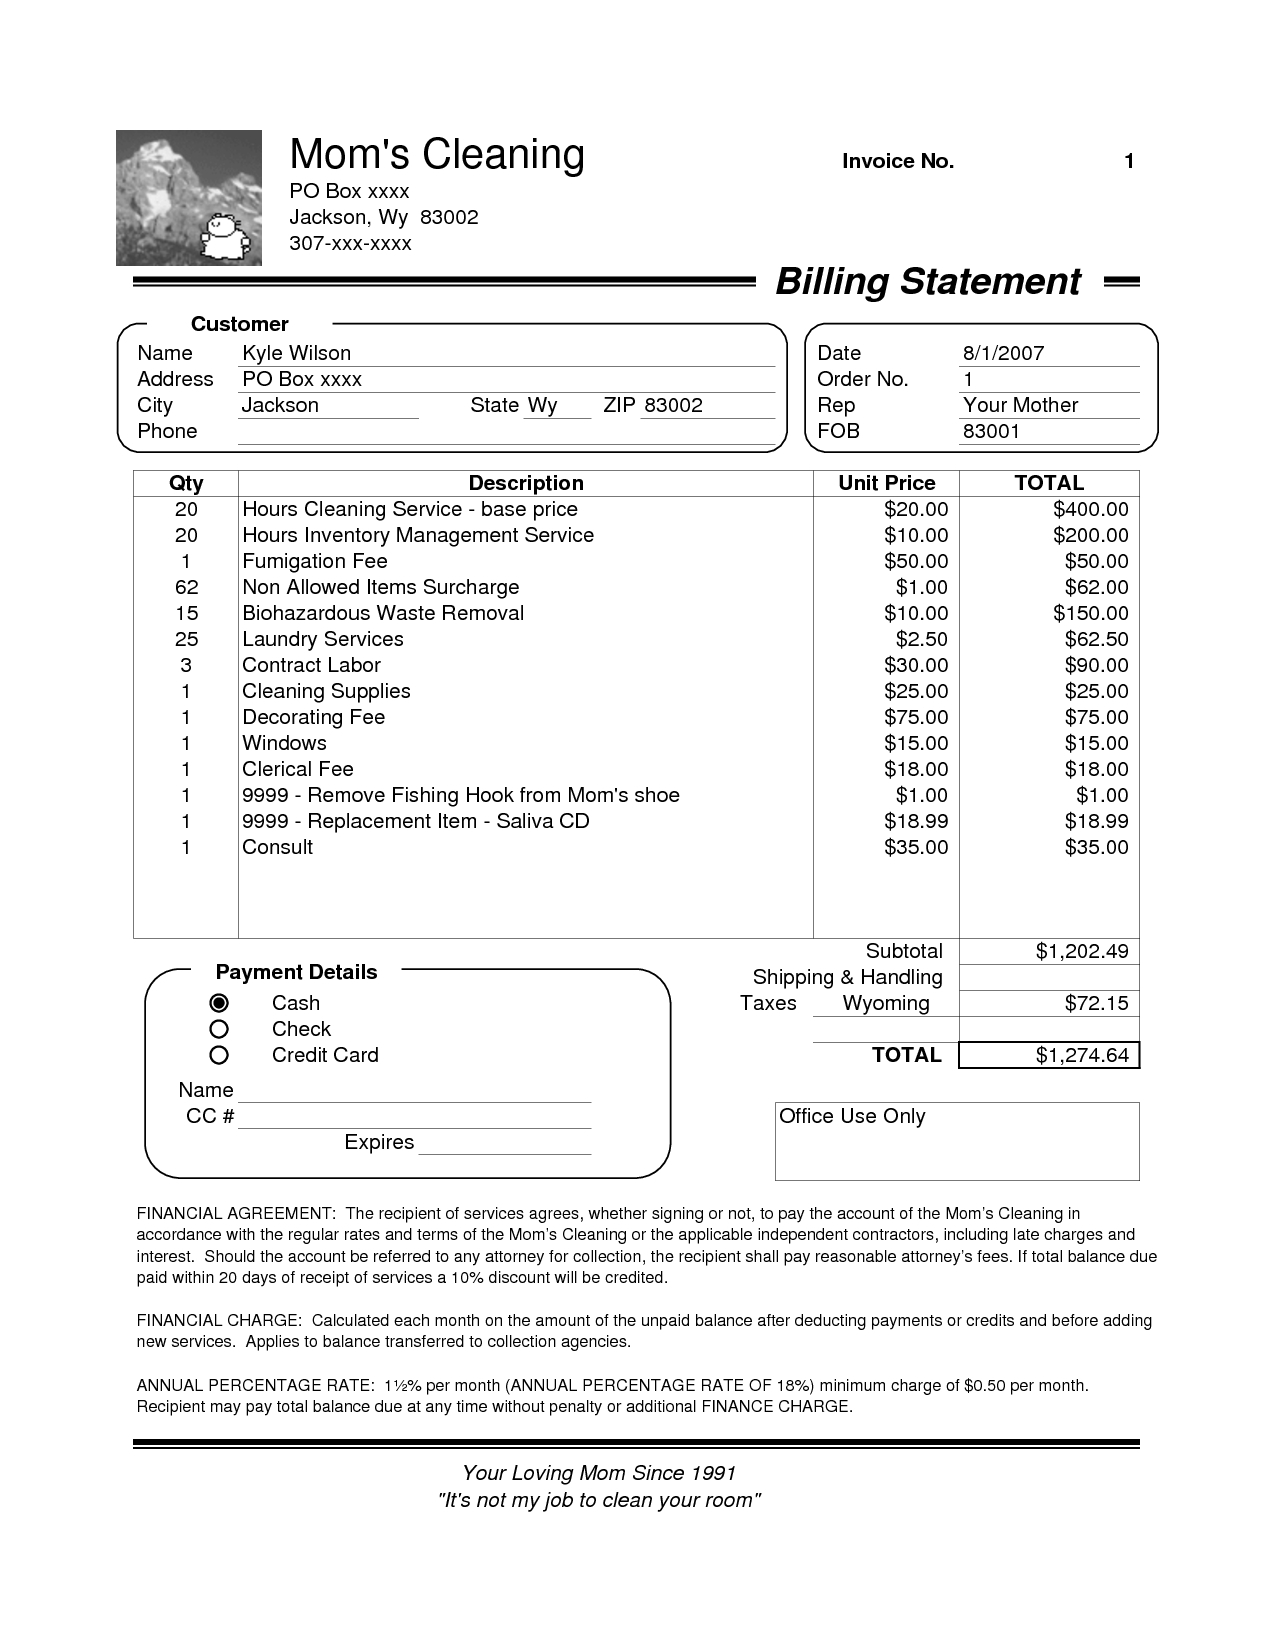 doc 12401754 blank service invoice template house cleaning free cr house cleaning invoice